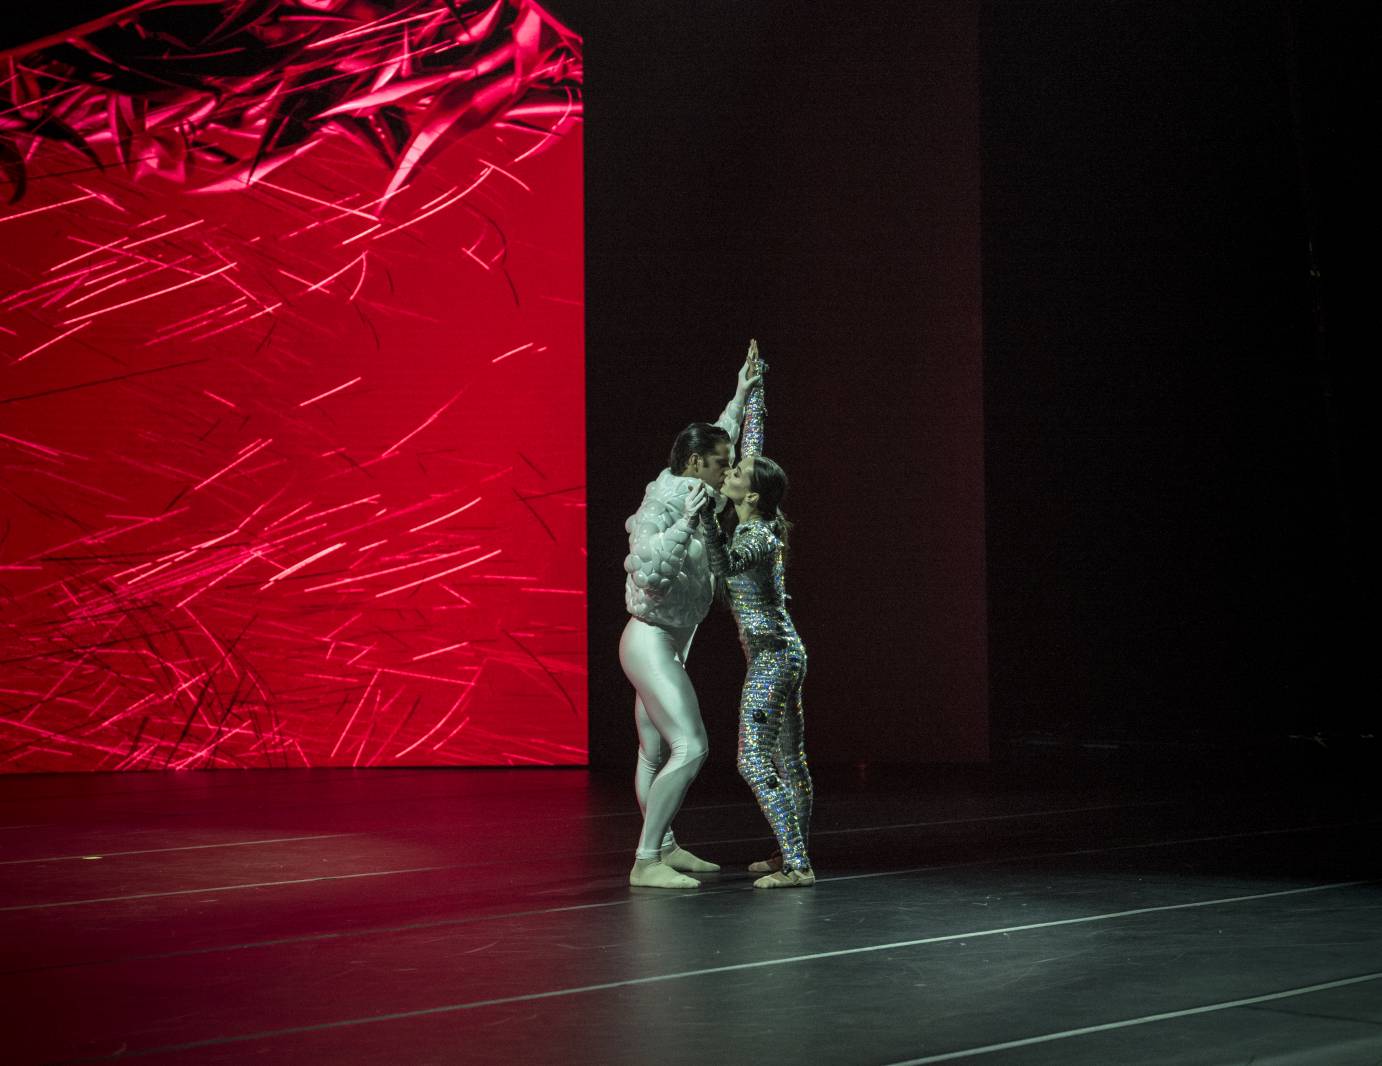 Two dancers against a red projection